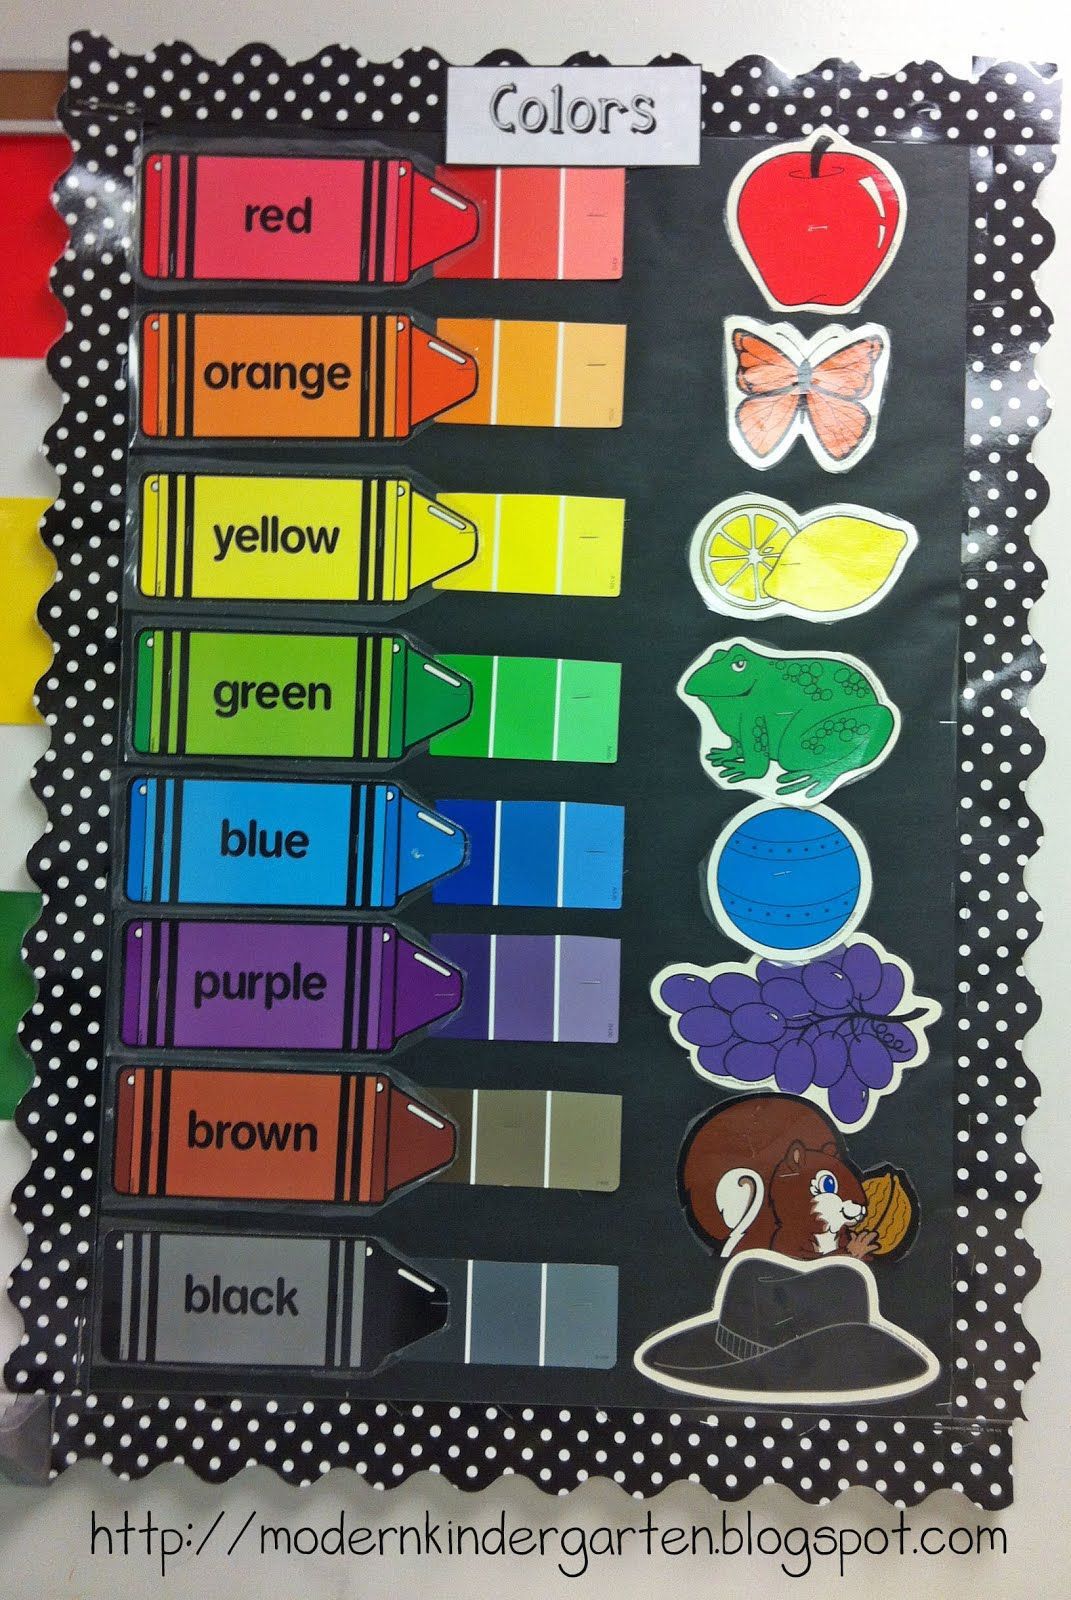 Modern Kindergarten: Classroom Decorations…like the idea of using paint chips to show the variations of each